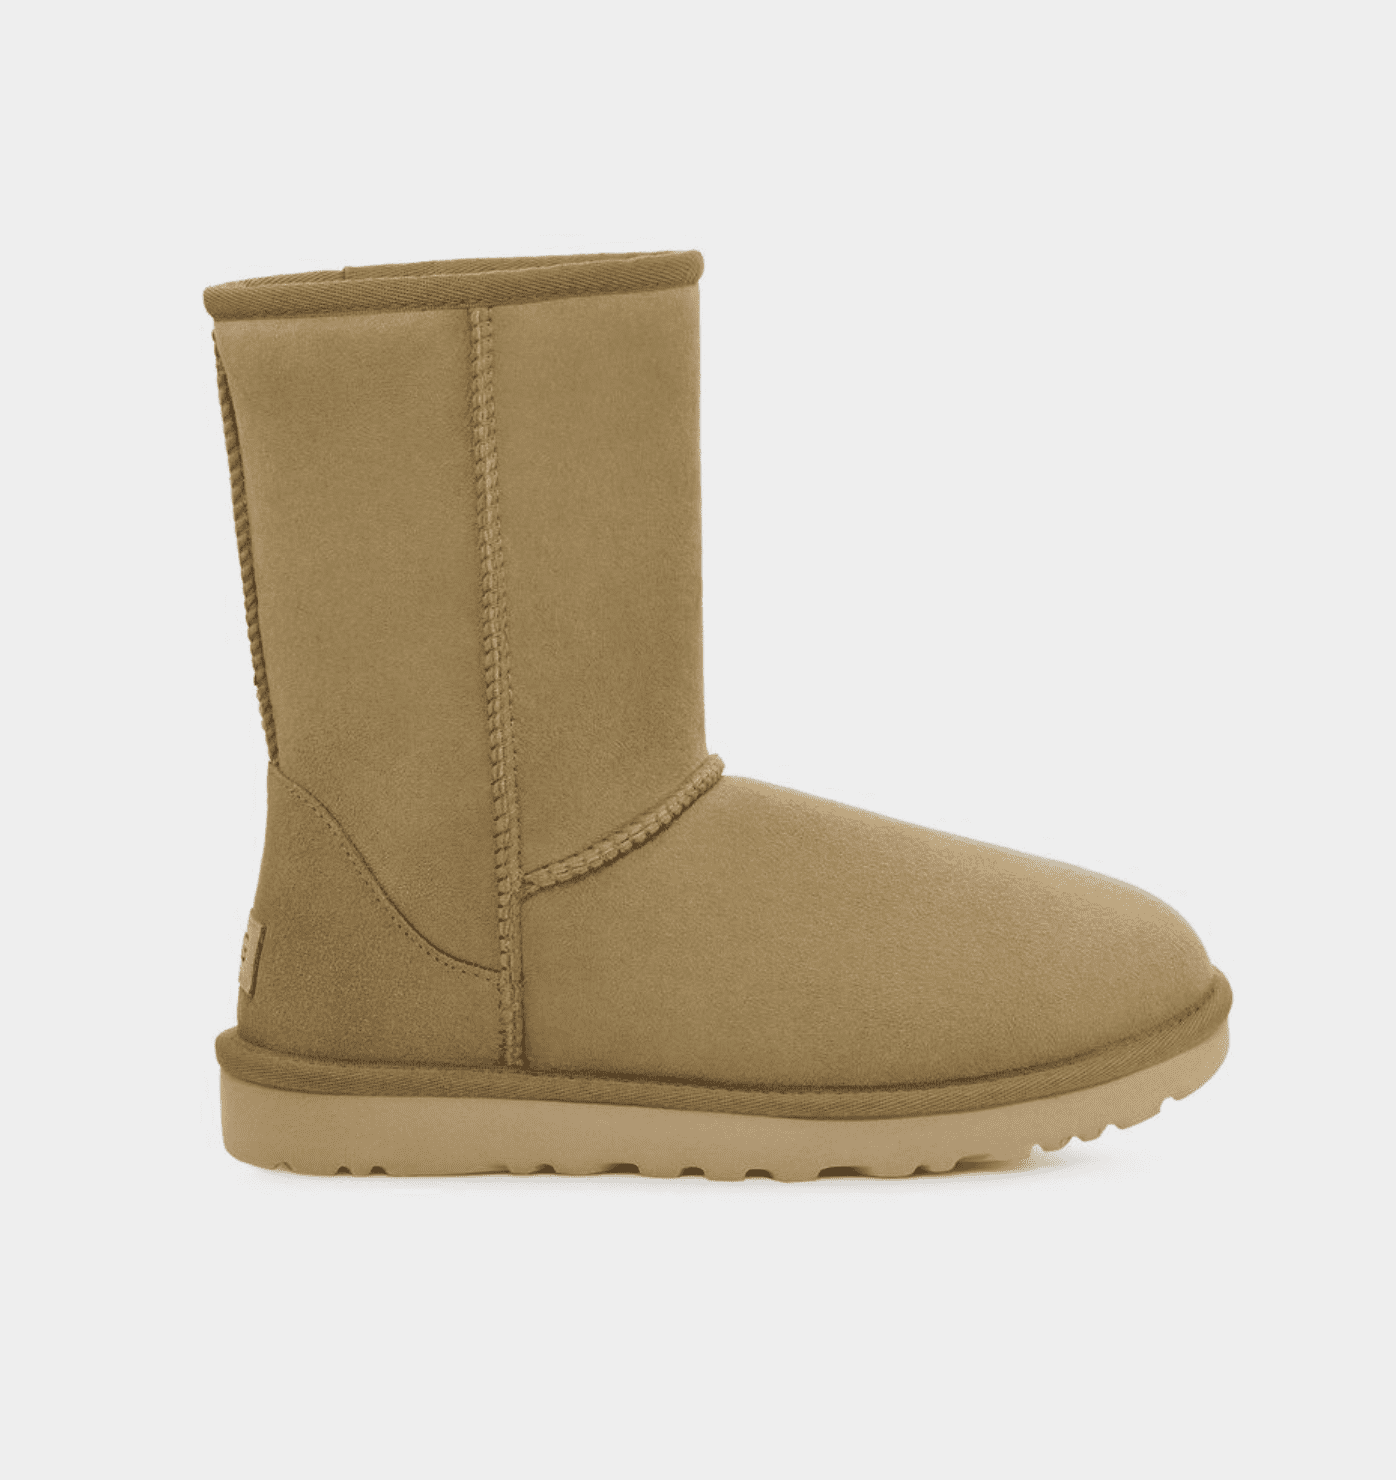 UGG: Fresh Markdowns. Up to 30% off sale styles